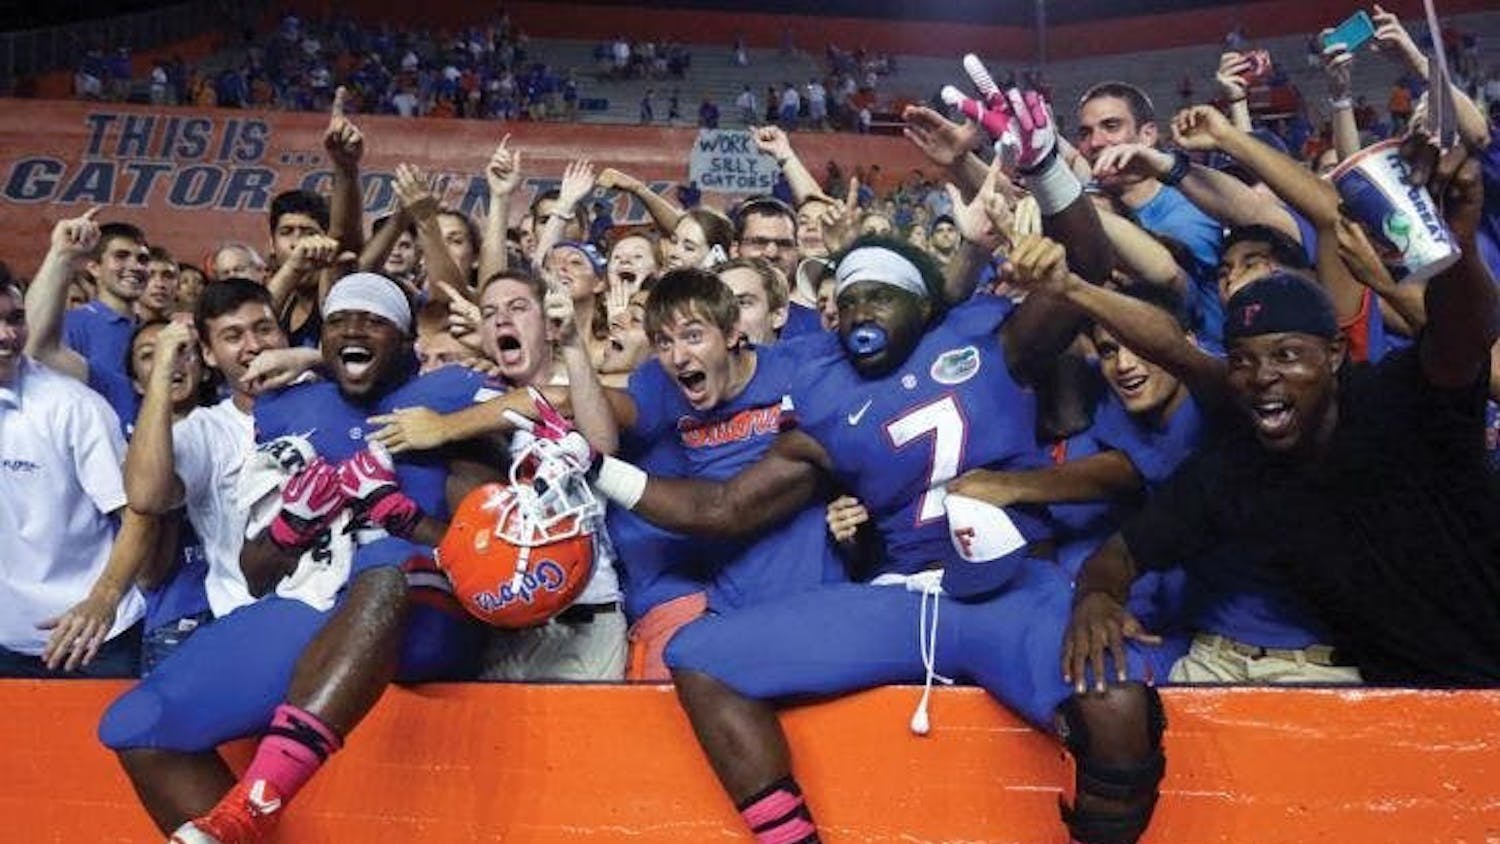 Florida football players celebrate with fans. The Swamp will see full attendance return in 2021